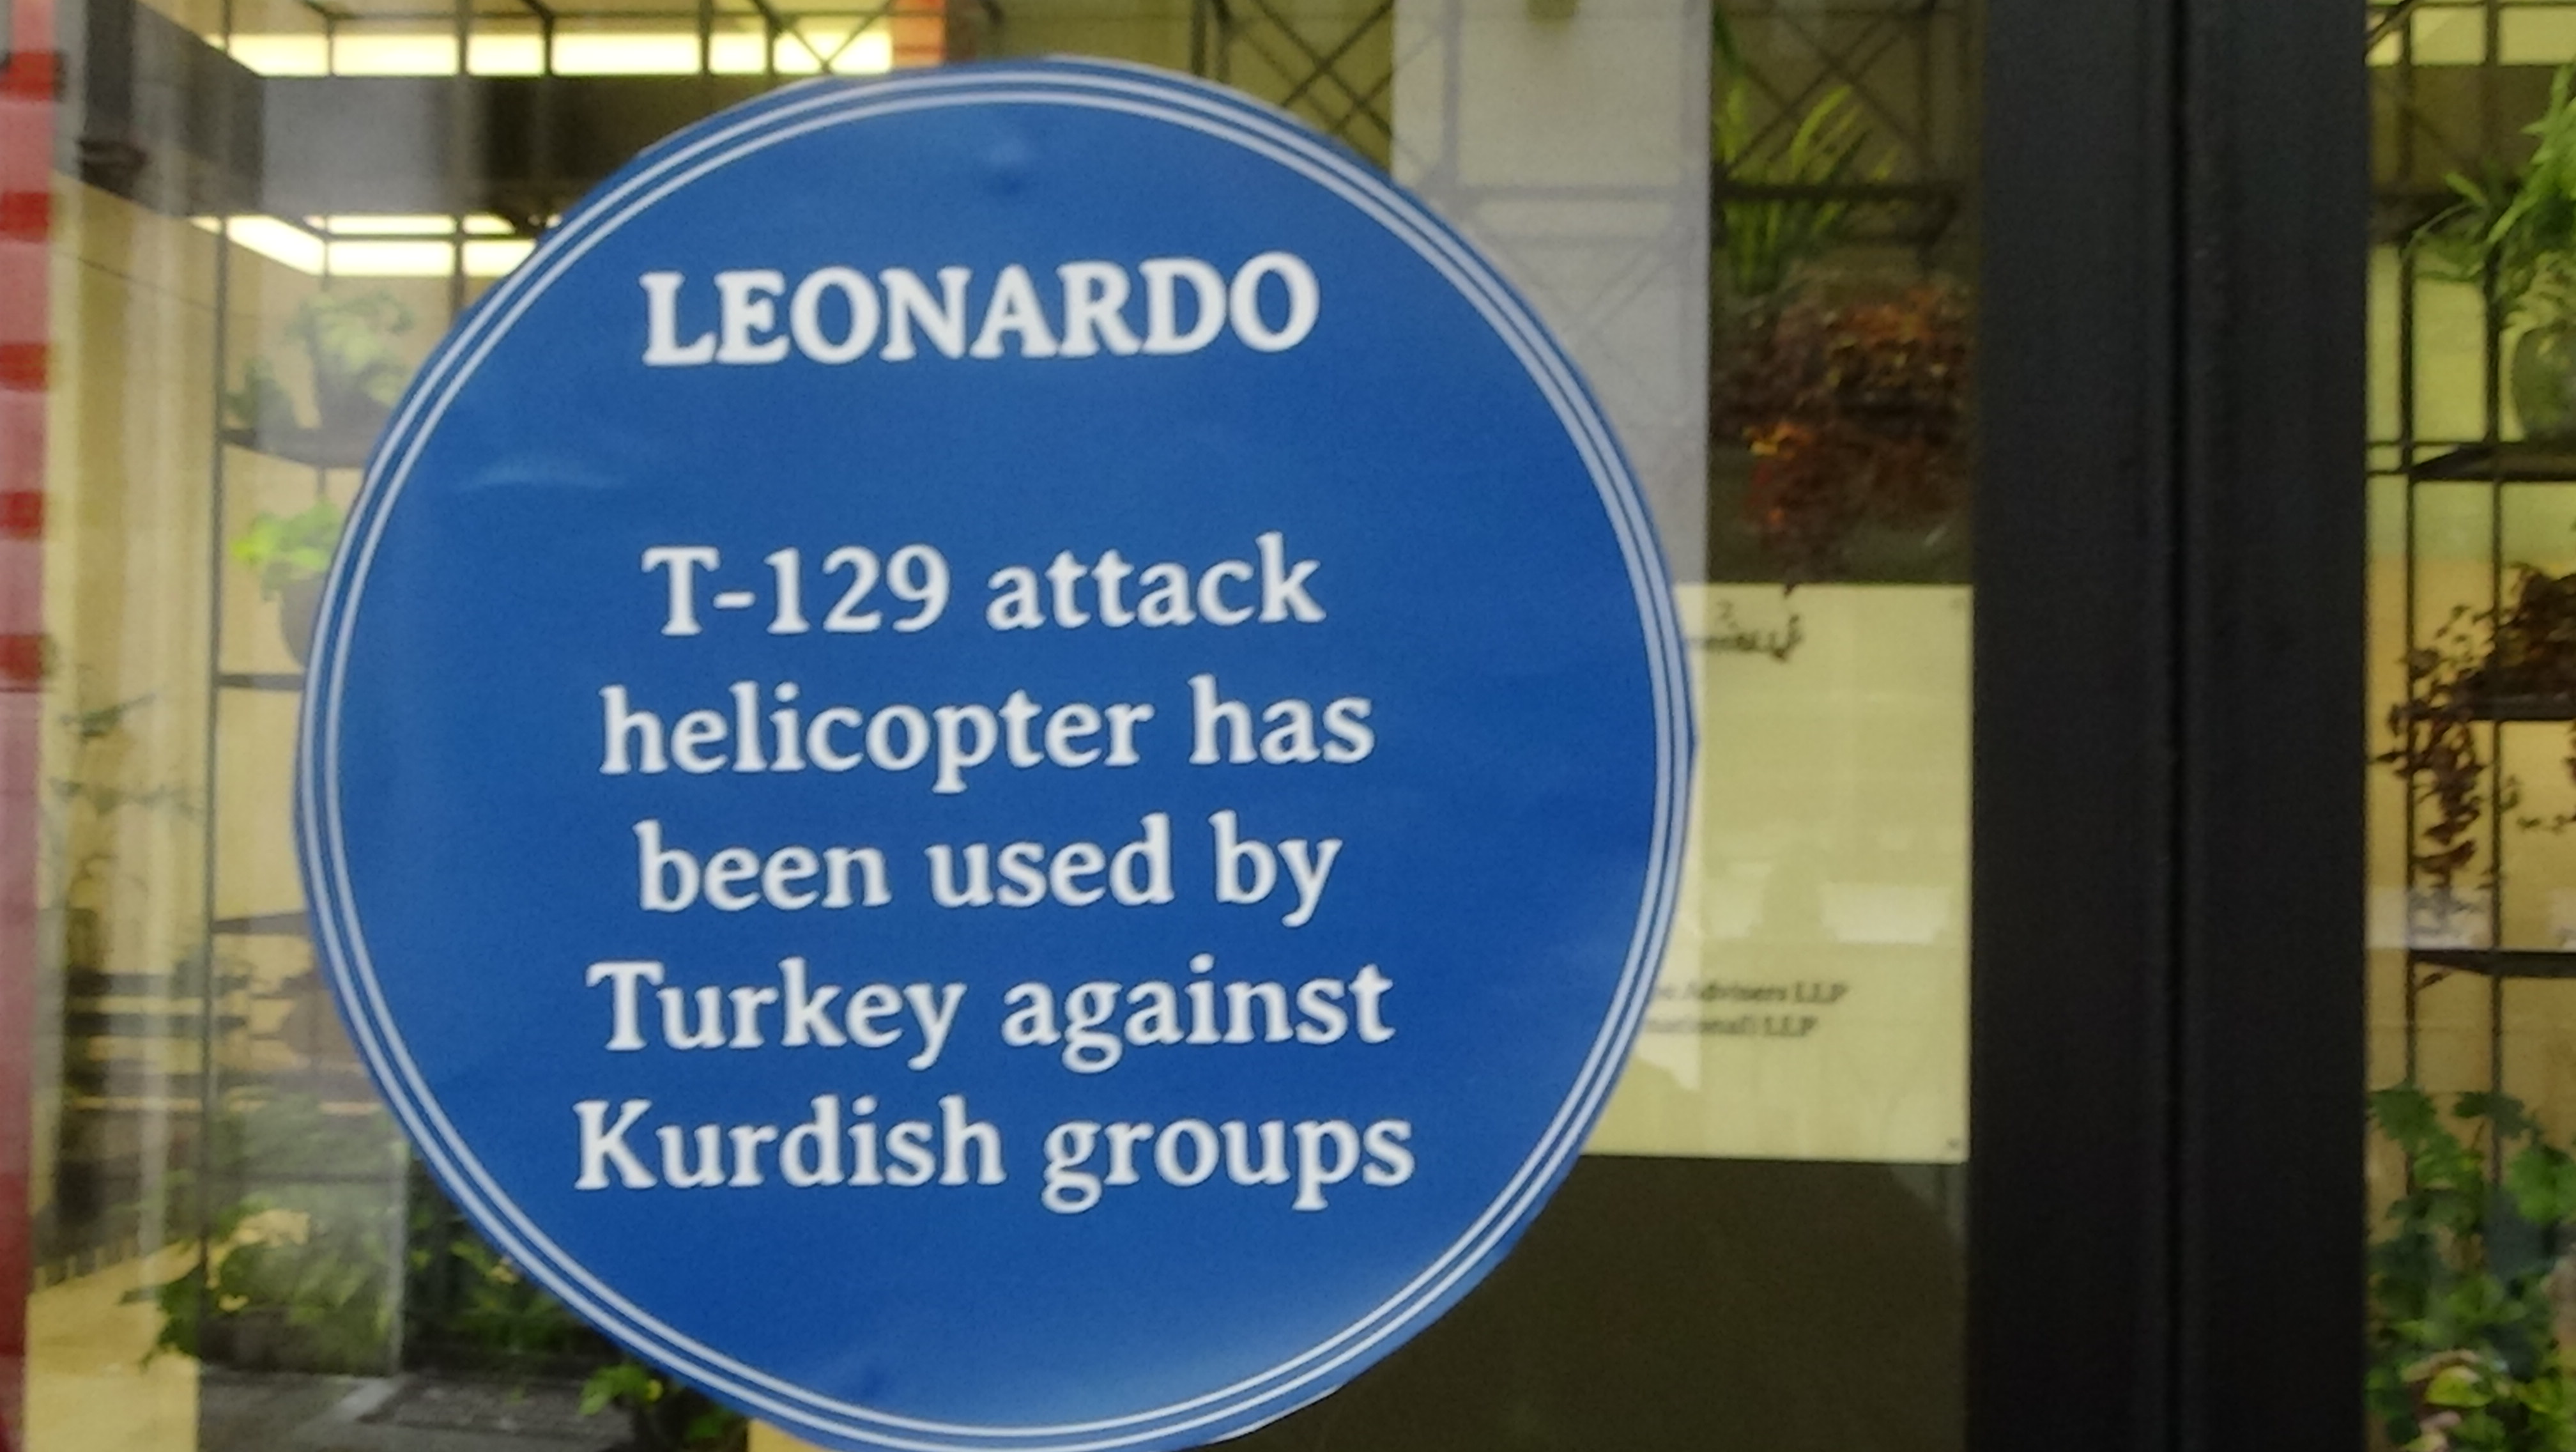 "Blue Plaque" on the offices of Leonardo. Plaque reads "T-29 attack helicopter has been used by Turkey against Kurdish groups"